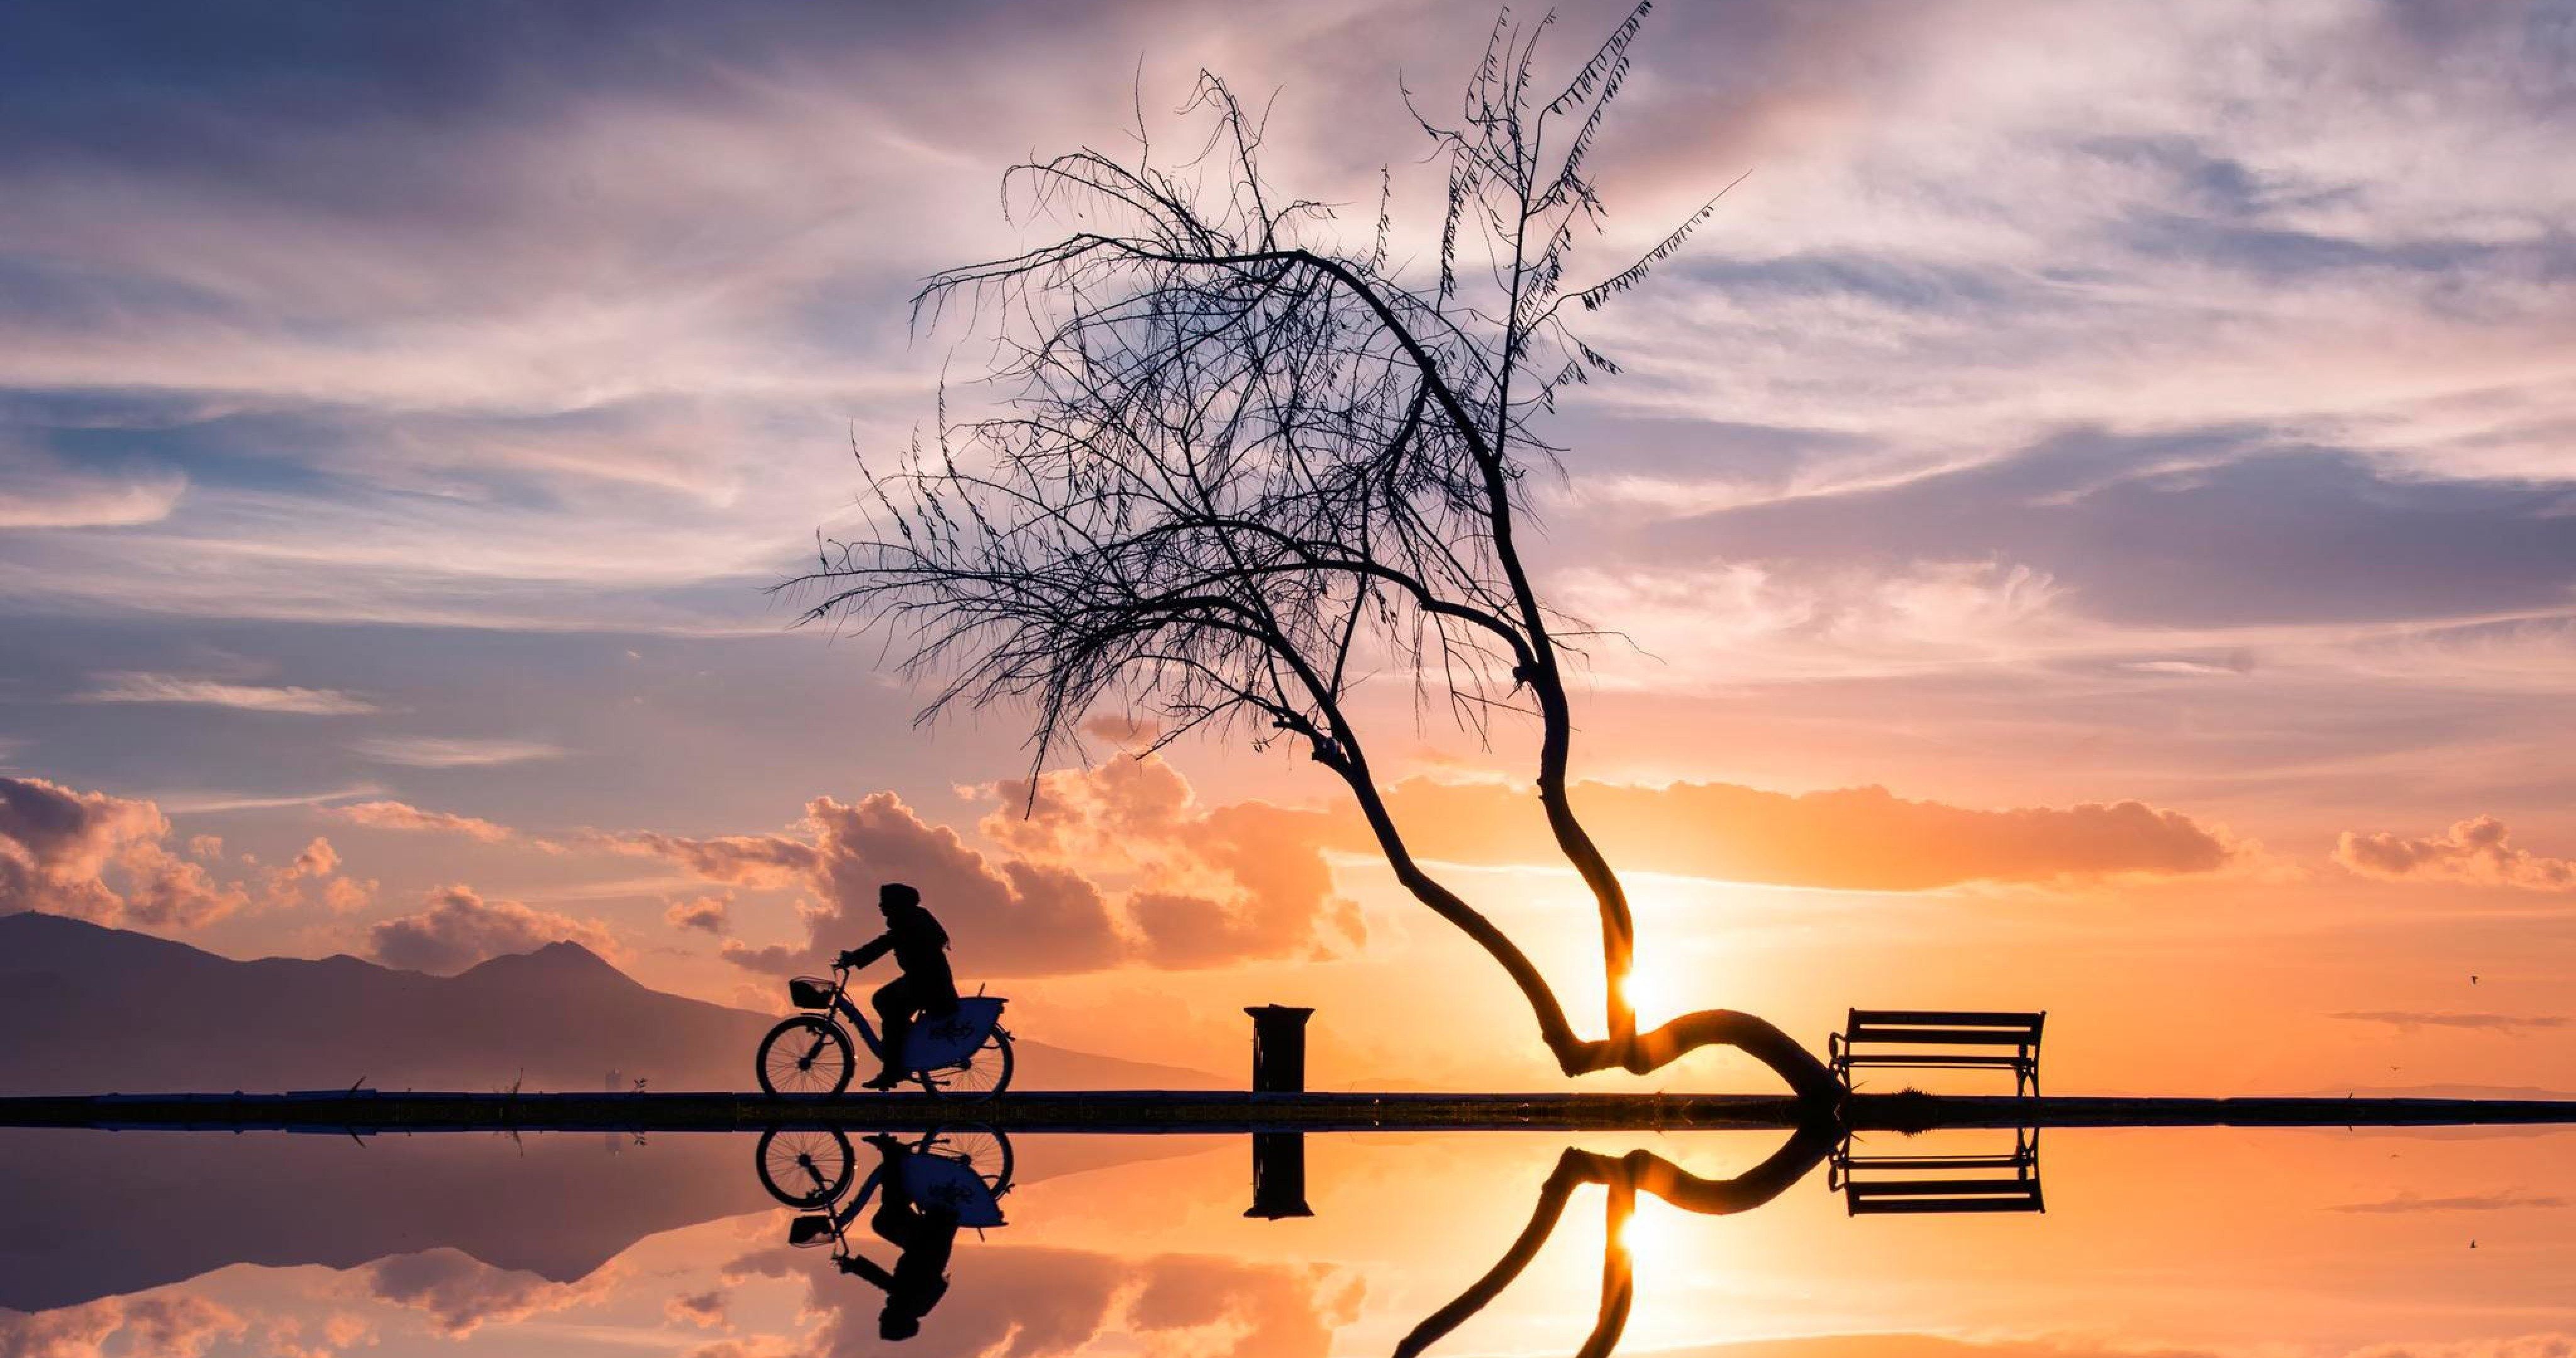 women on bycicle in sunset 4k ultra HD wallpaper High quality walls